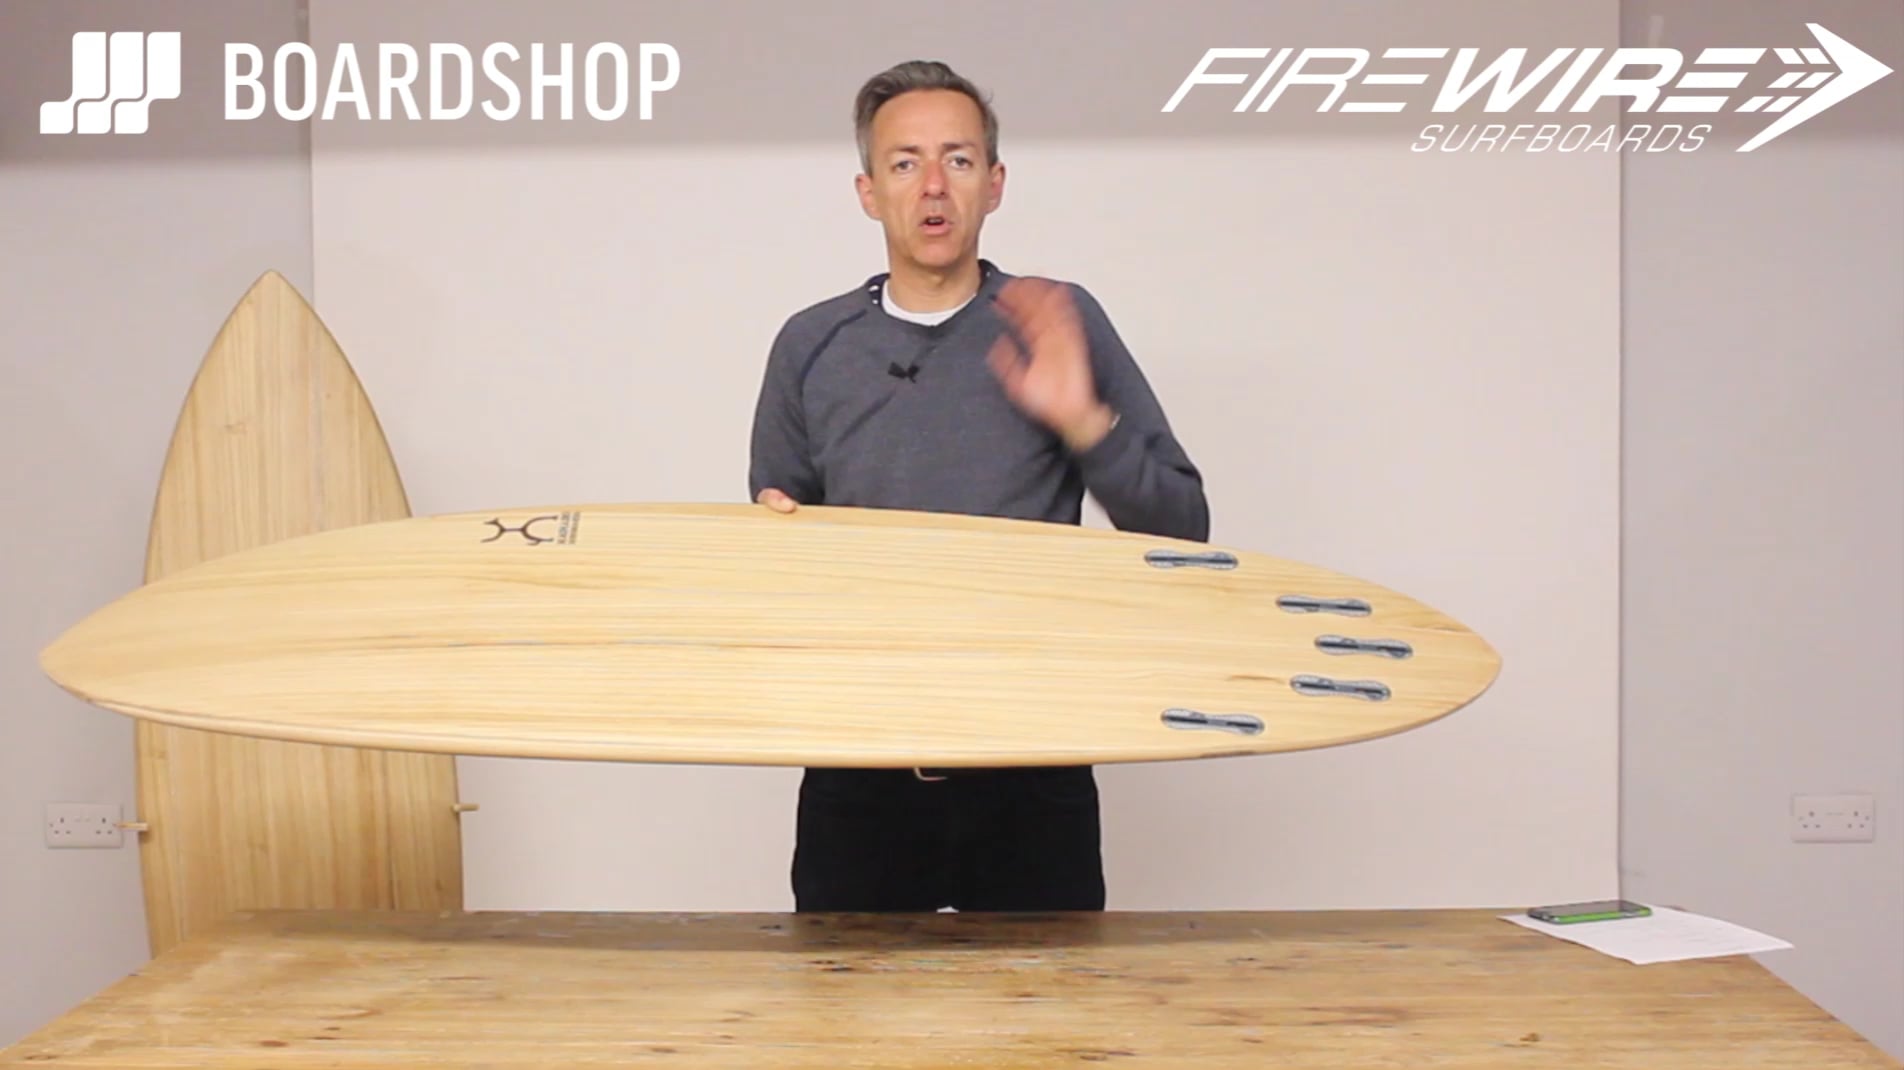 Firewire Creeper Surfboard Review